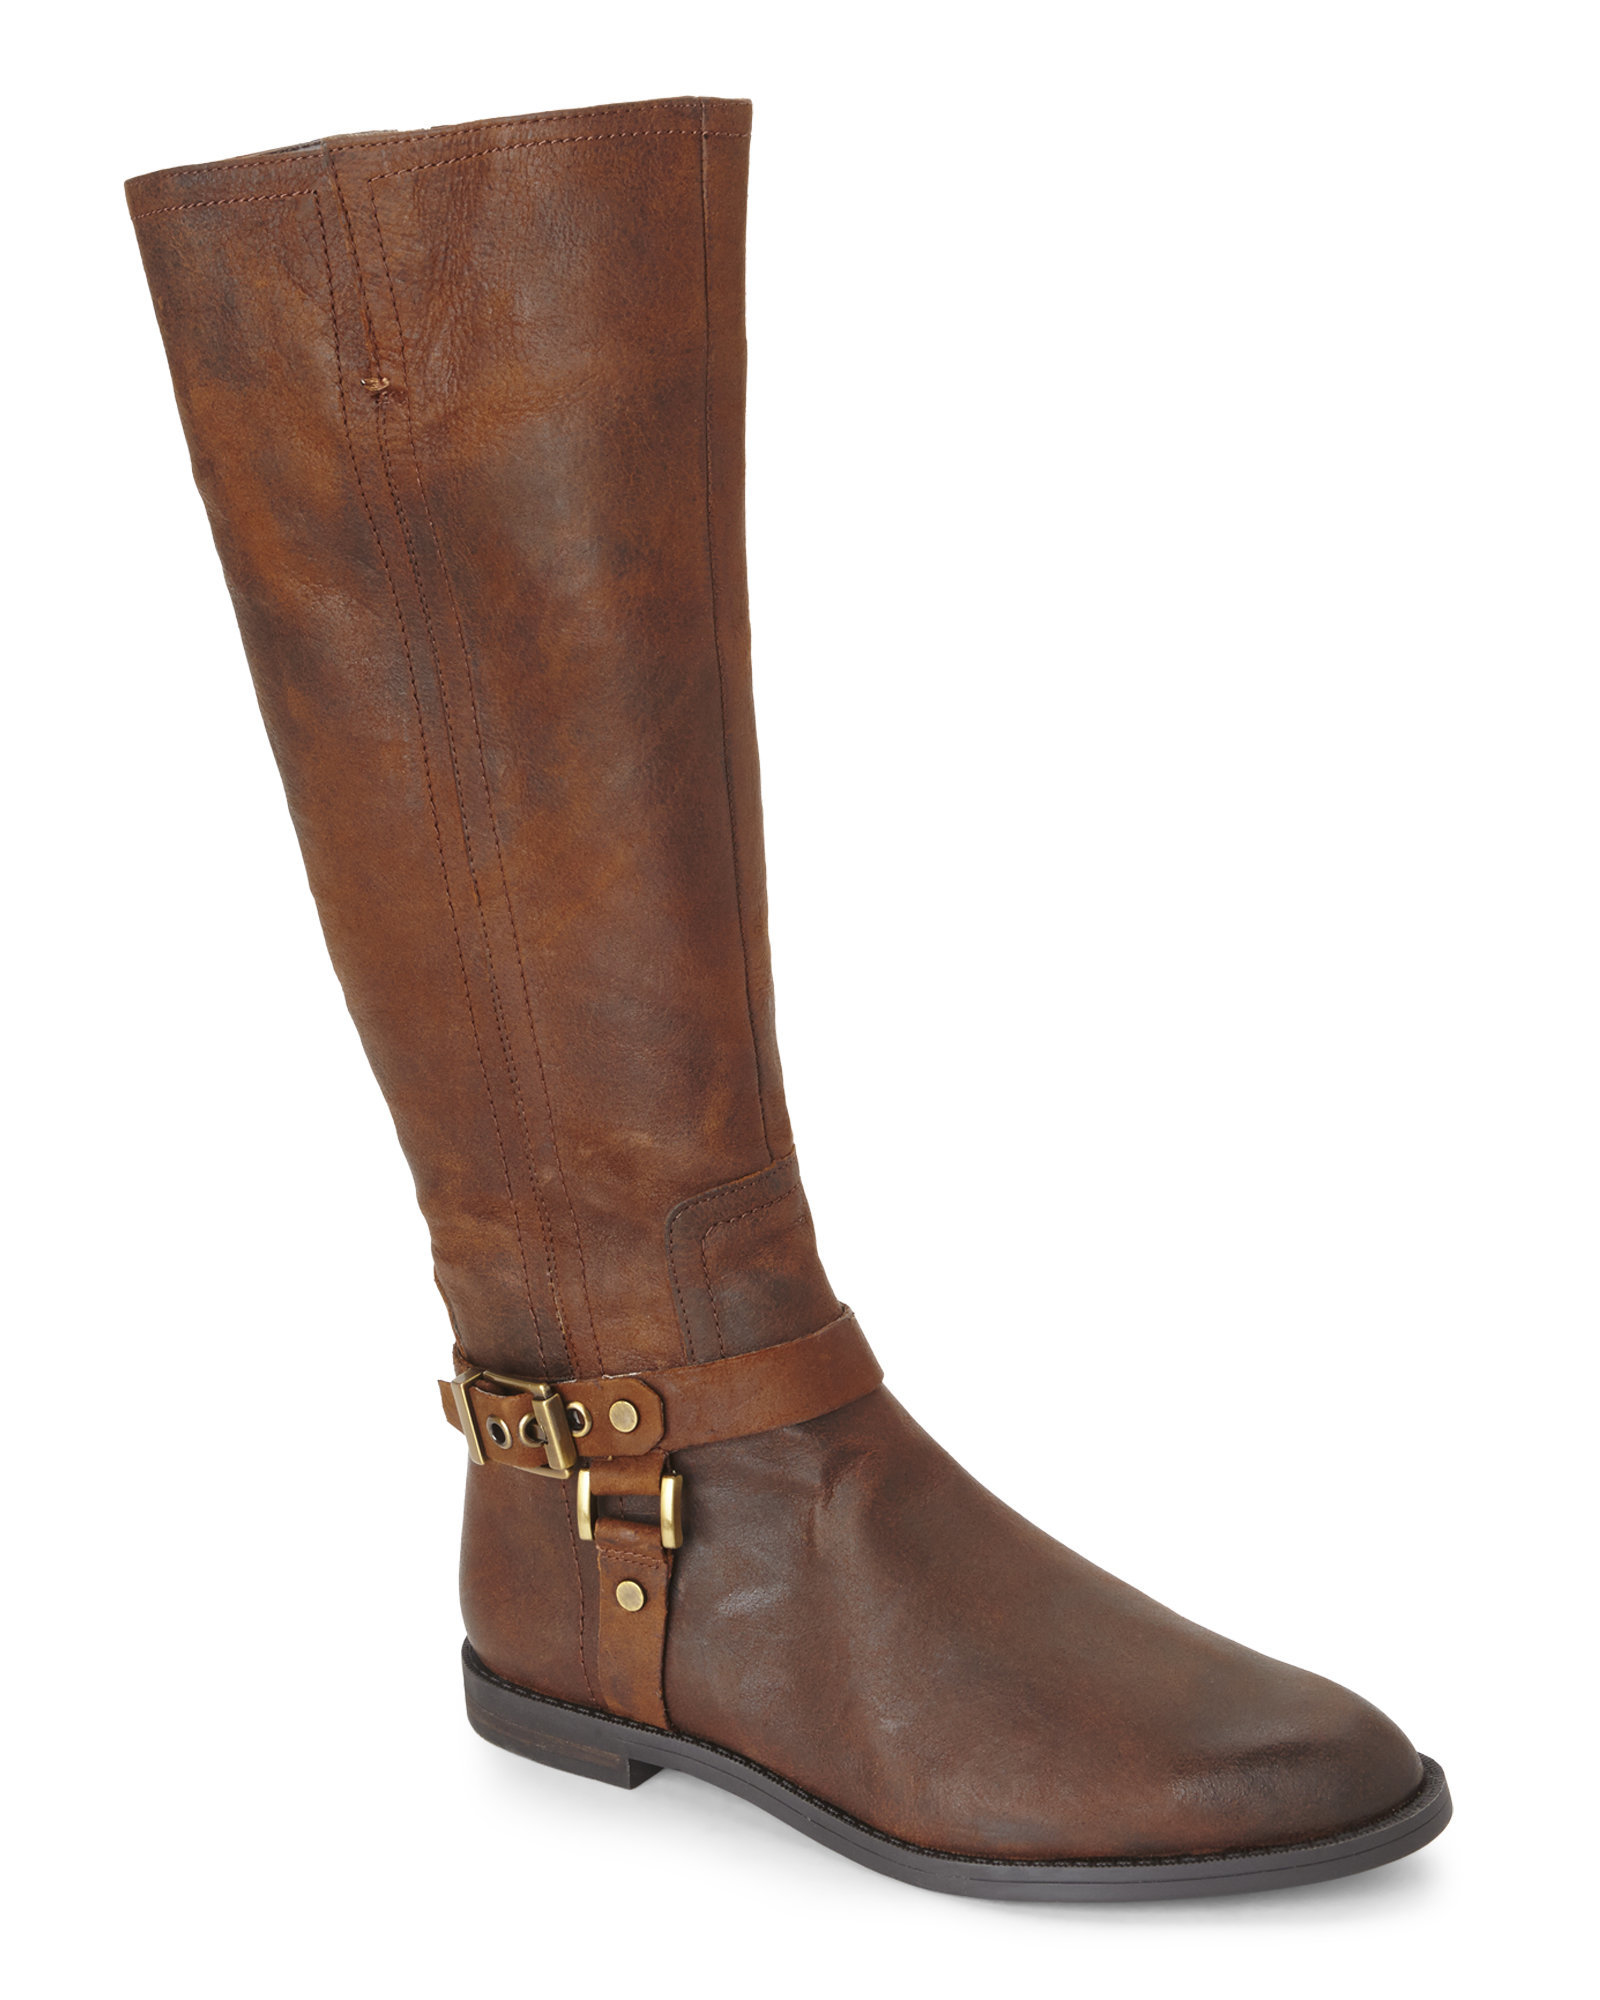 Franco sarto Vantage Leather Knee-High Boots in Brown | Lyst